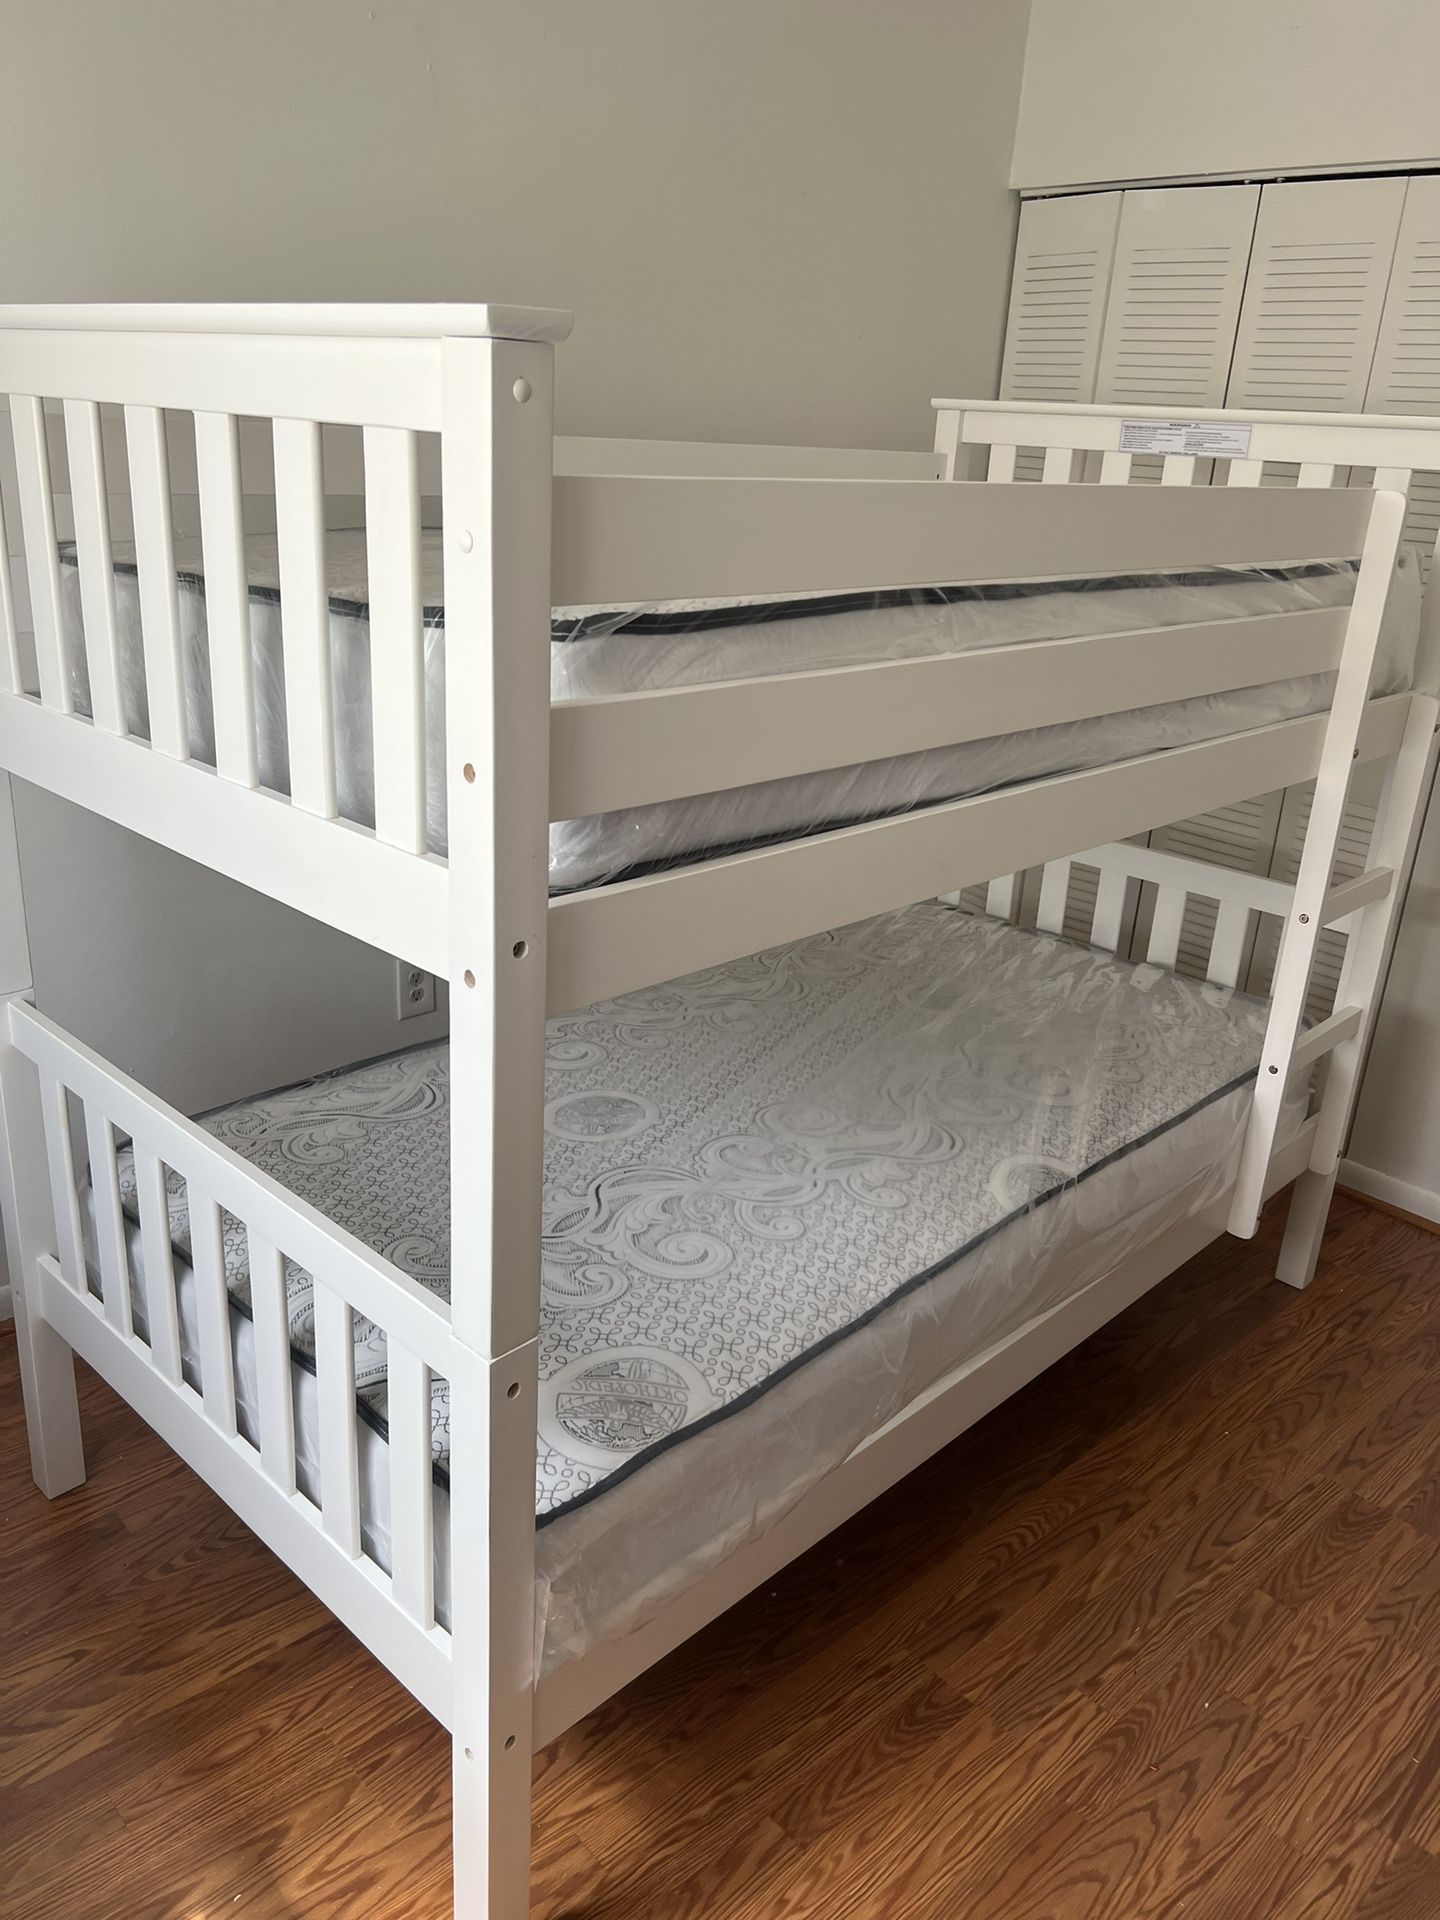 Twin over Twin bunk beds frame and free delivery in box with the mattress 